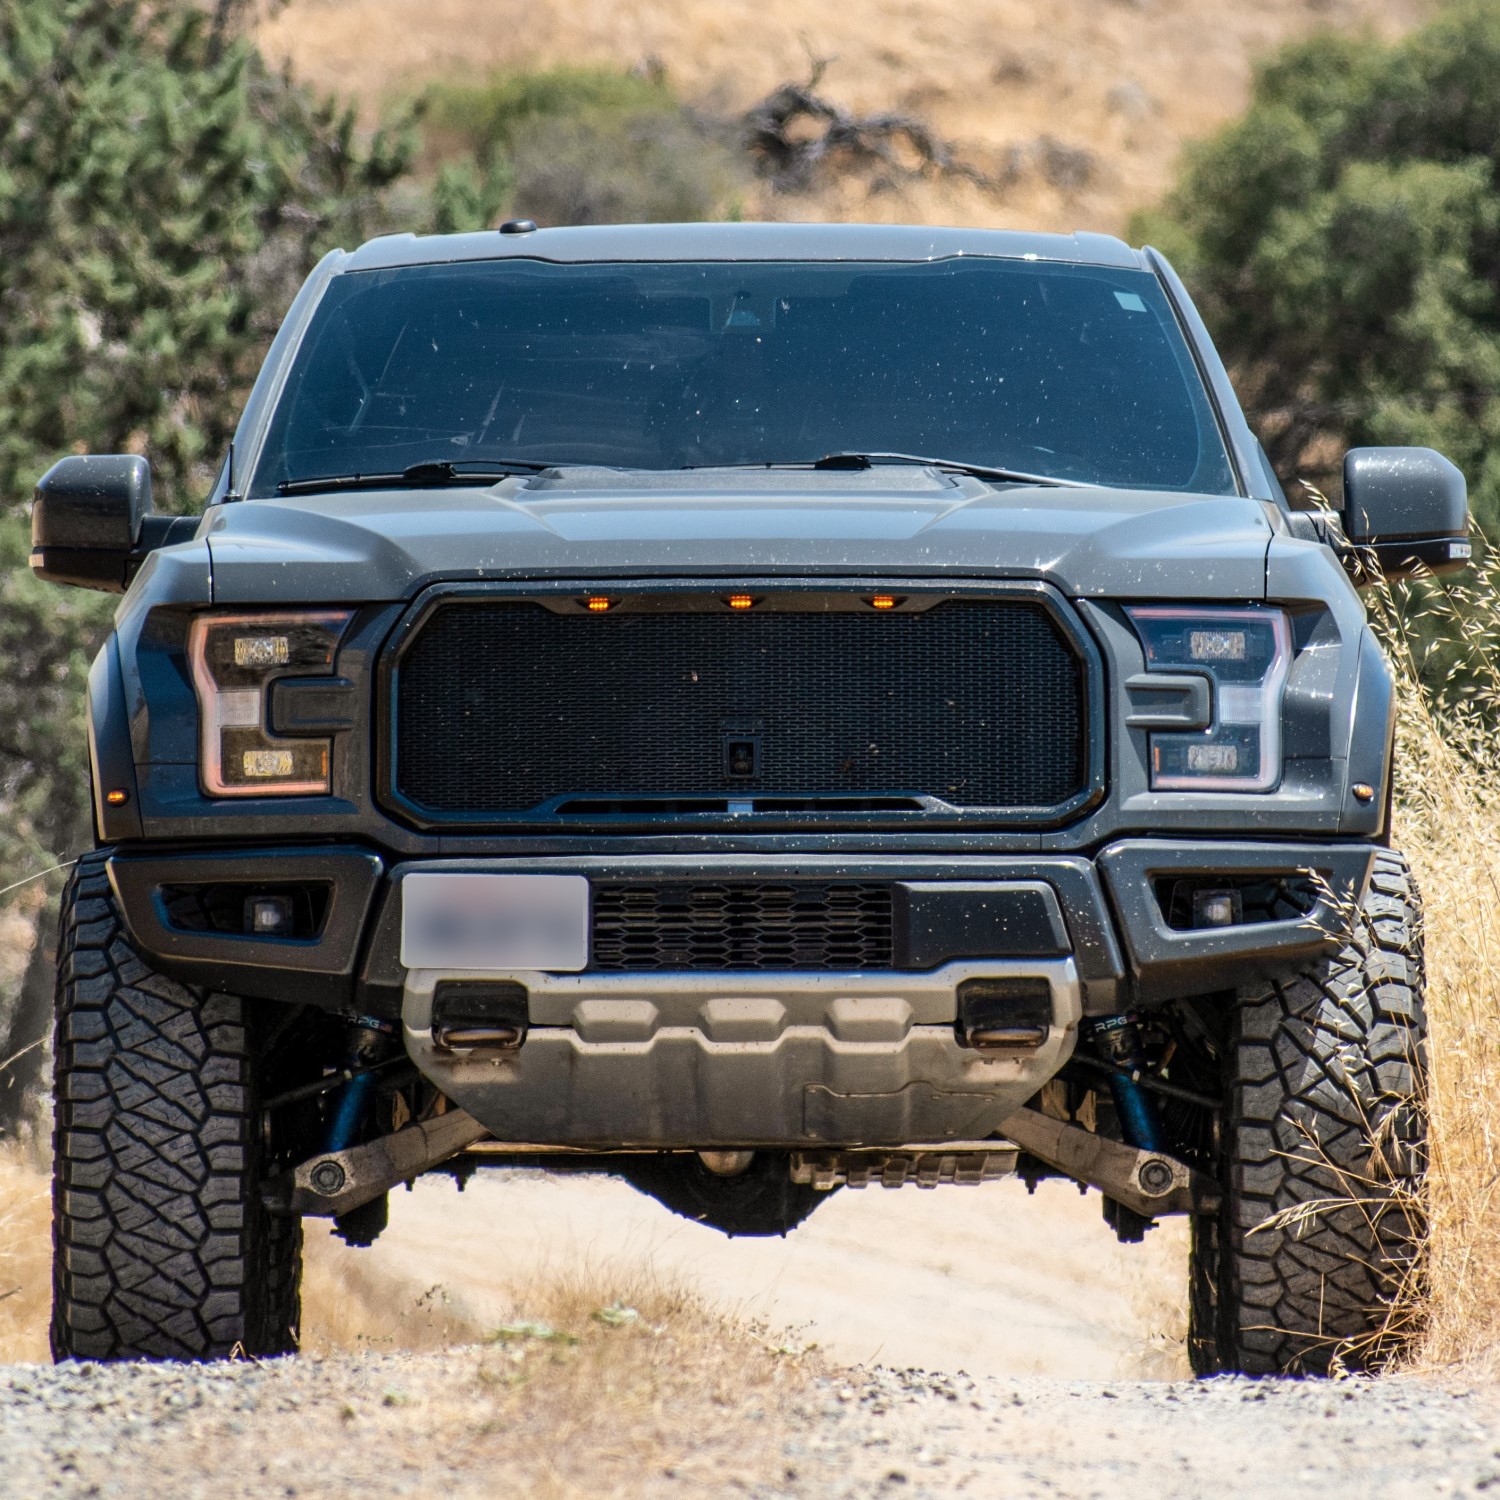 Raptor Unleashed: The Power of Simplicity with the Plain Grille Ford F150 Raptor